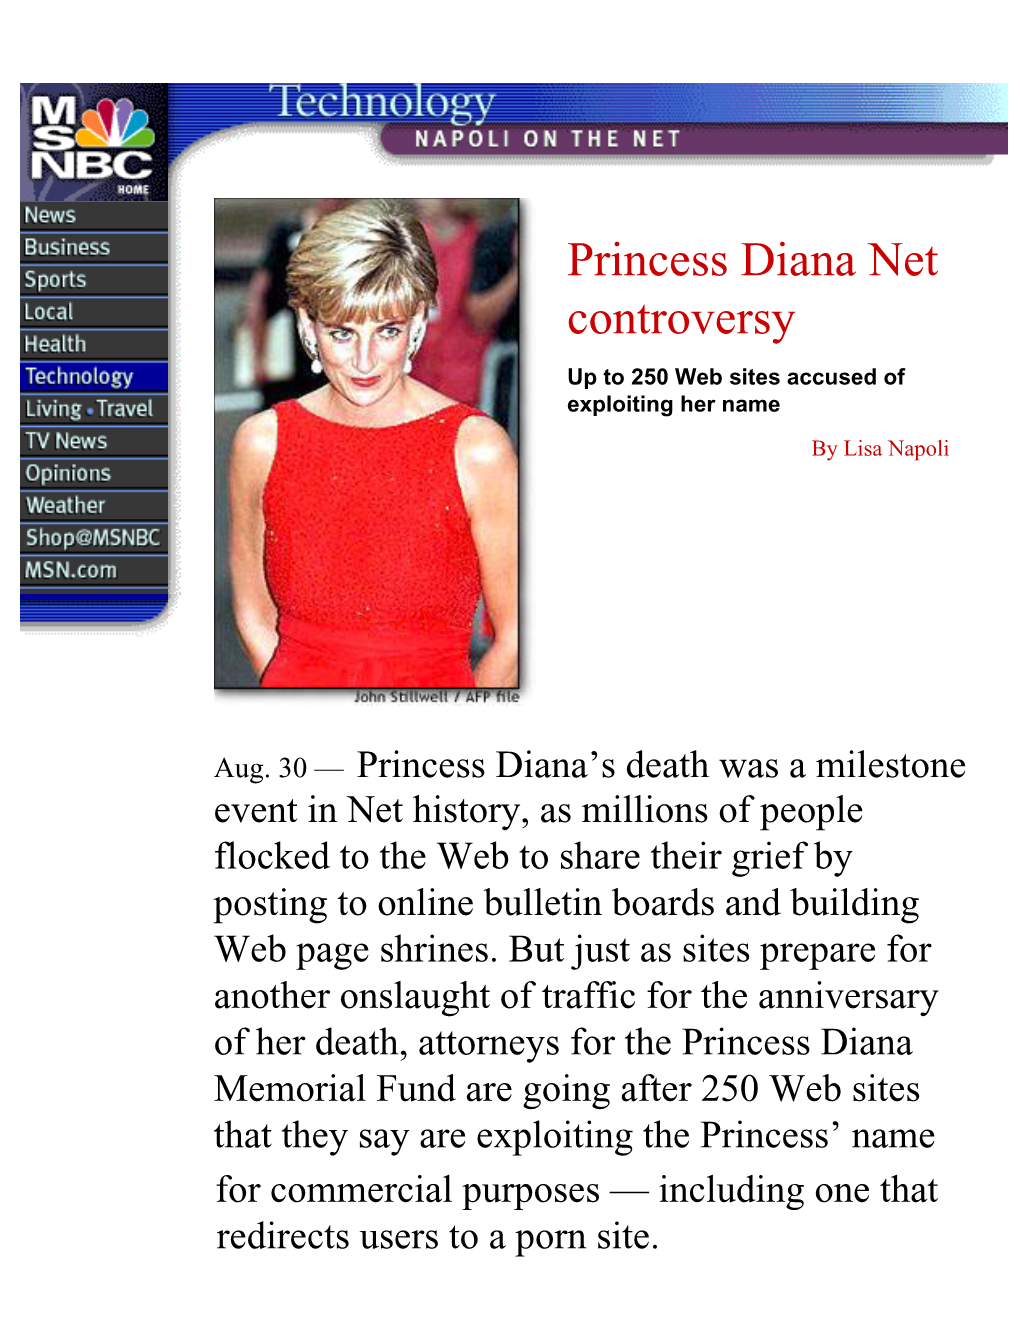 Princess Diana Net Controversy up to 250 Web Sites Accused of Exploiting Her Name